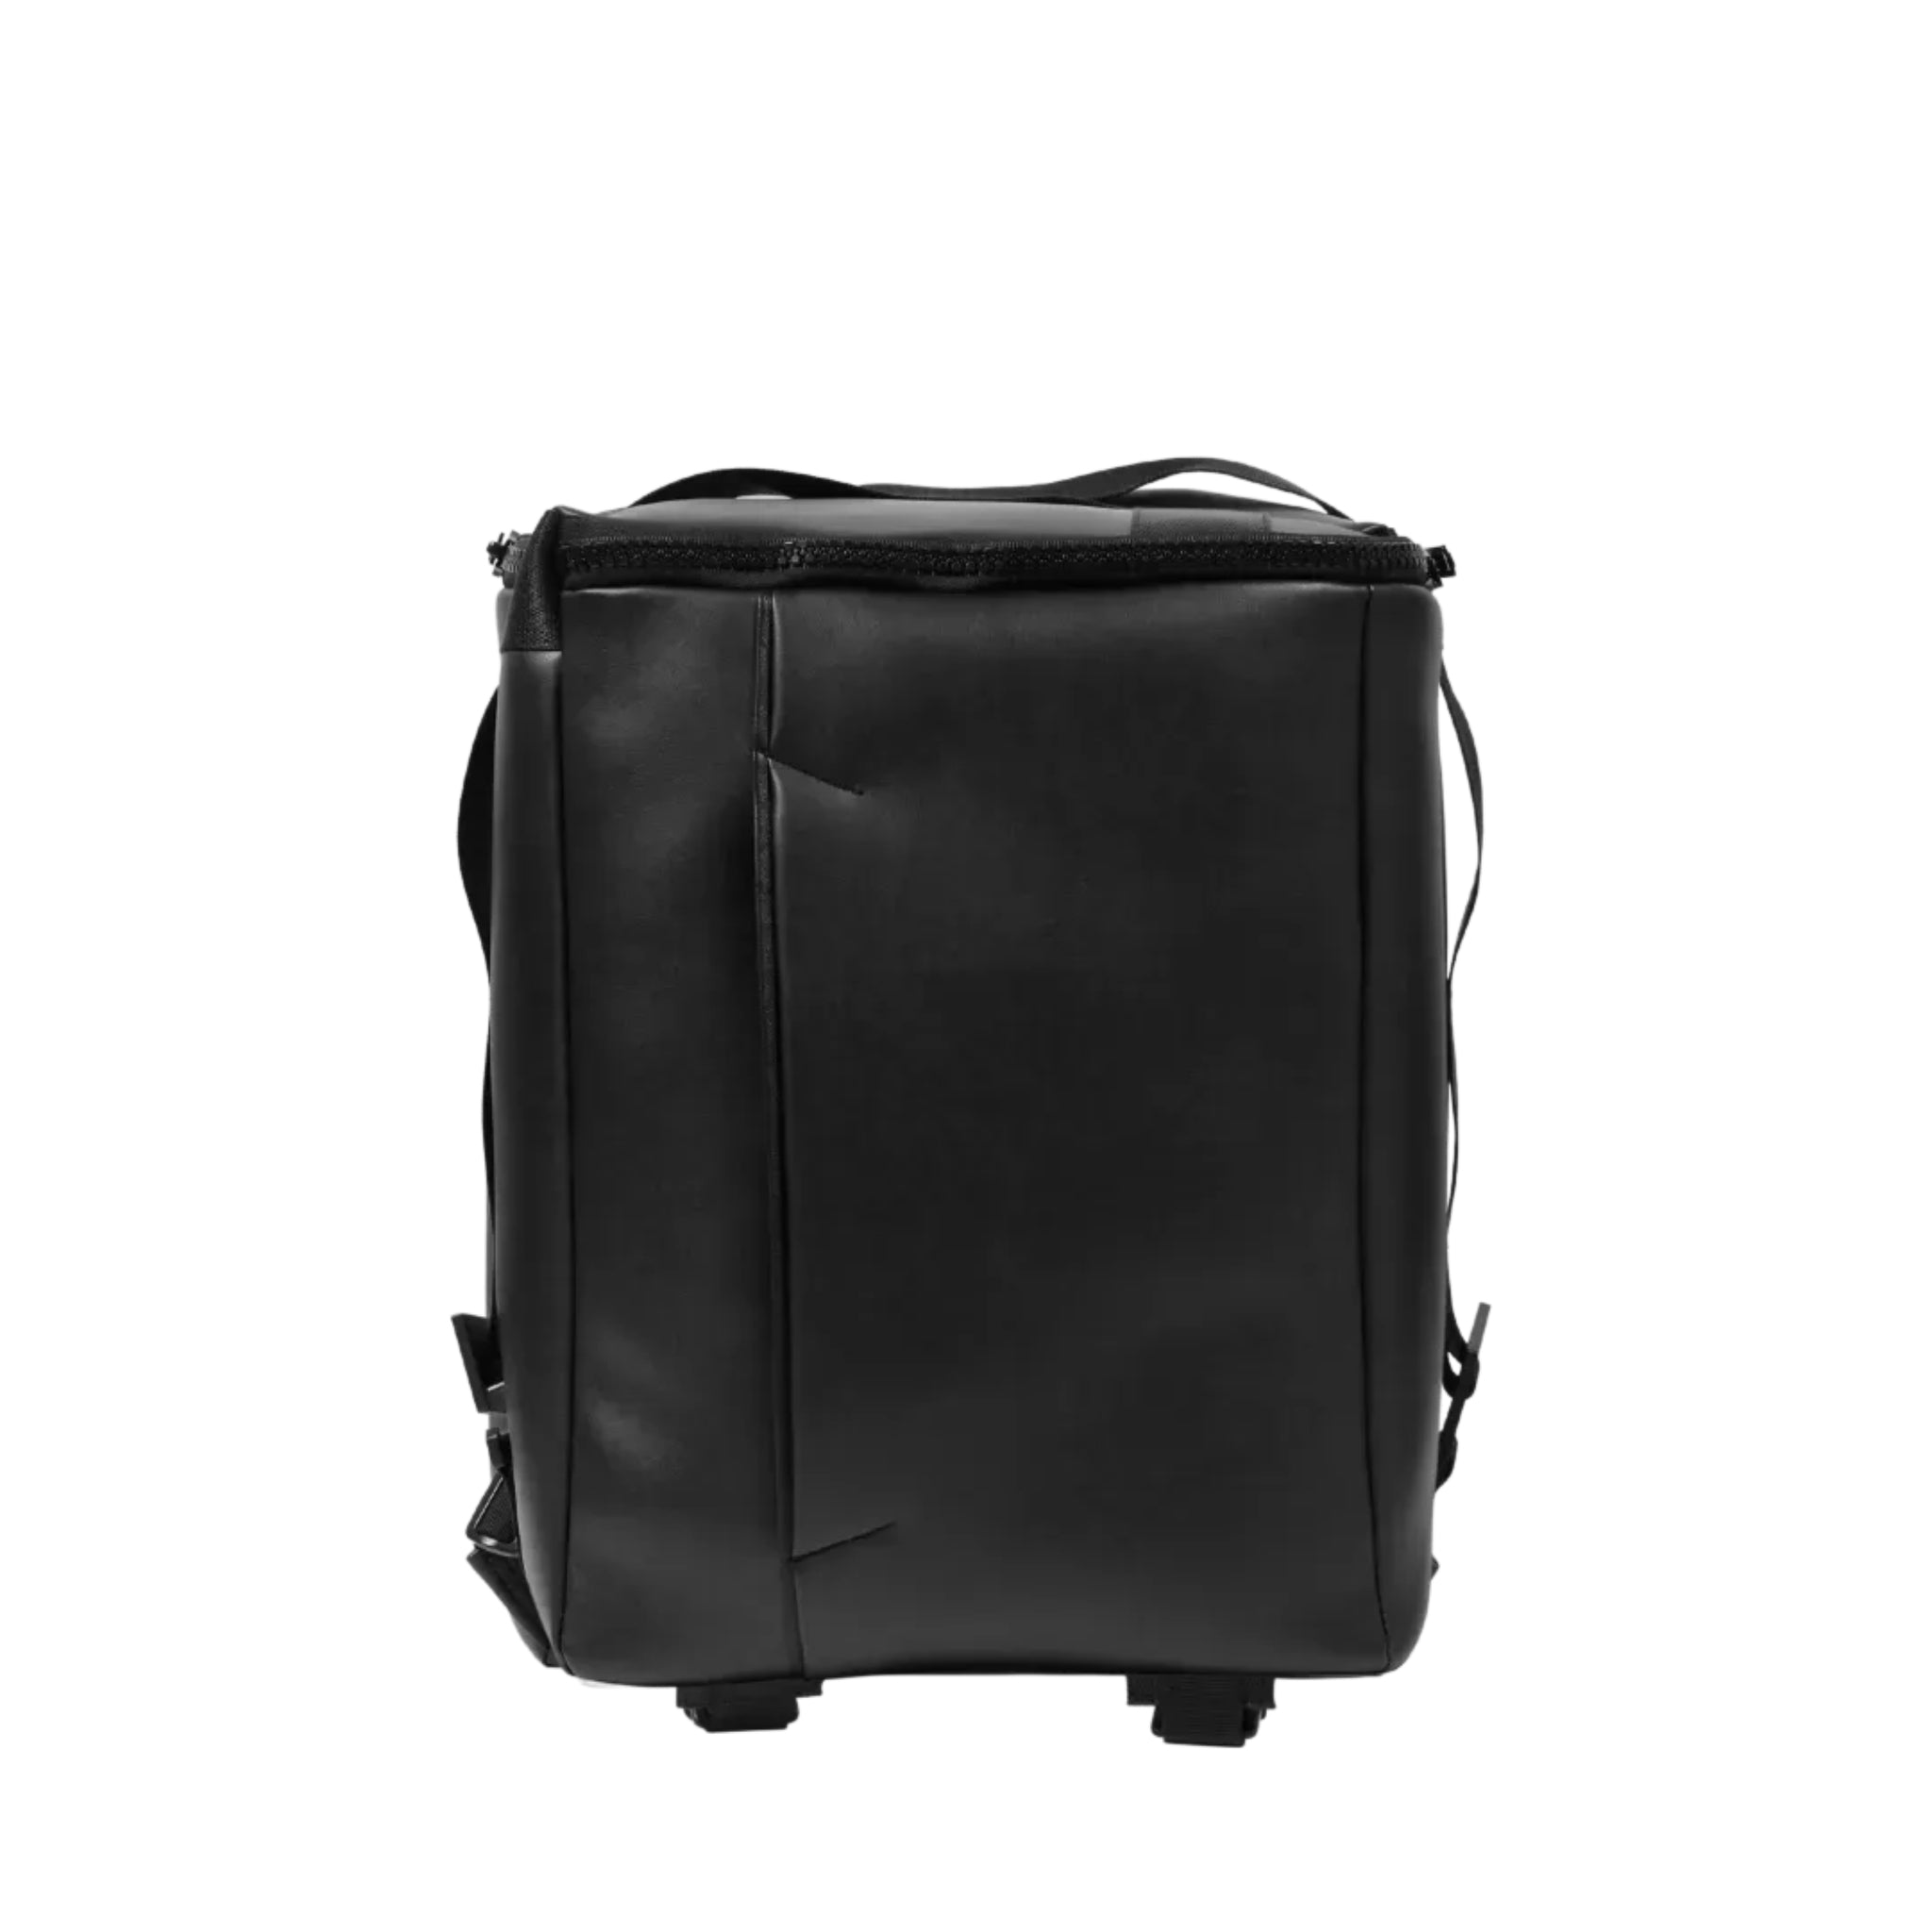 the front of an Interesting rectangular shaped backpack in black vegan leather material (Desserto) on a white background.